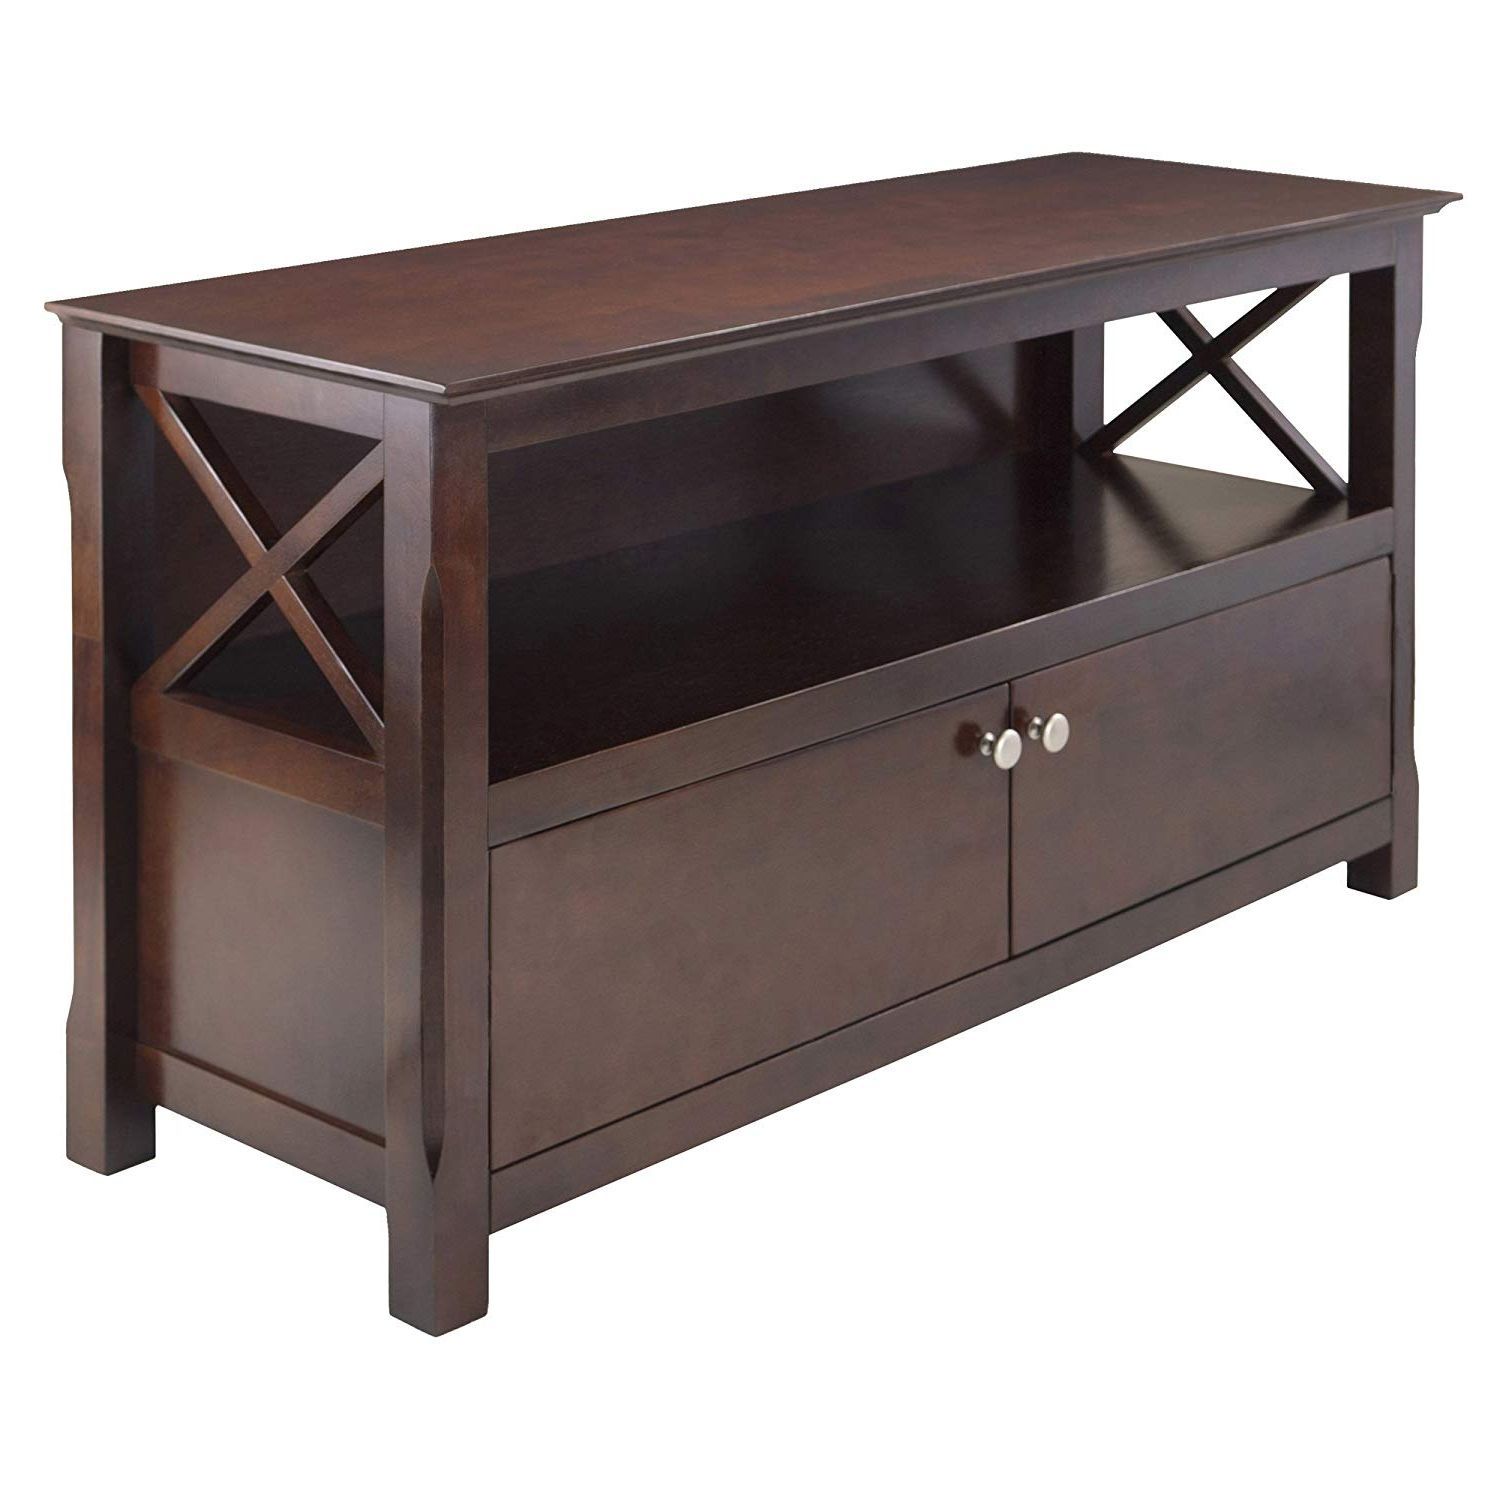 Most Recent Amazon: Winsome Wood Xola Tv Stand: Kitchen & Dining Inside Cheap Wood Tv Stands (View 1 of 10)